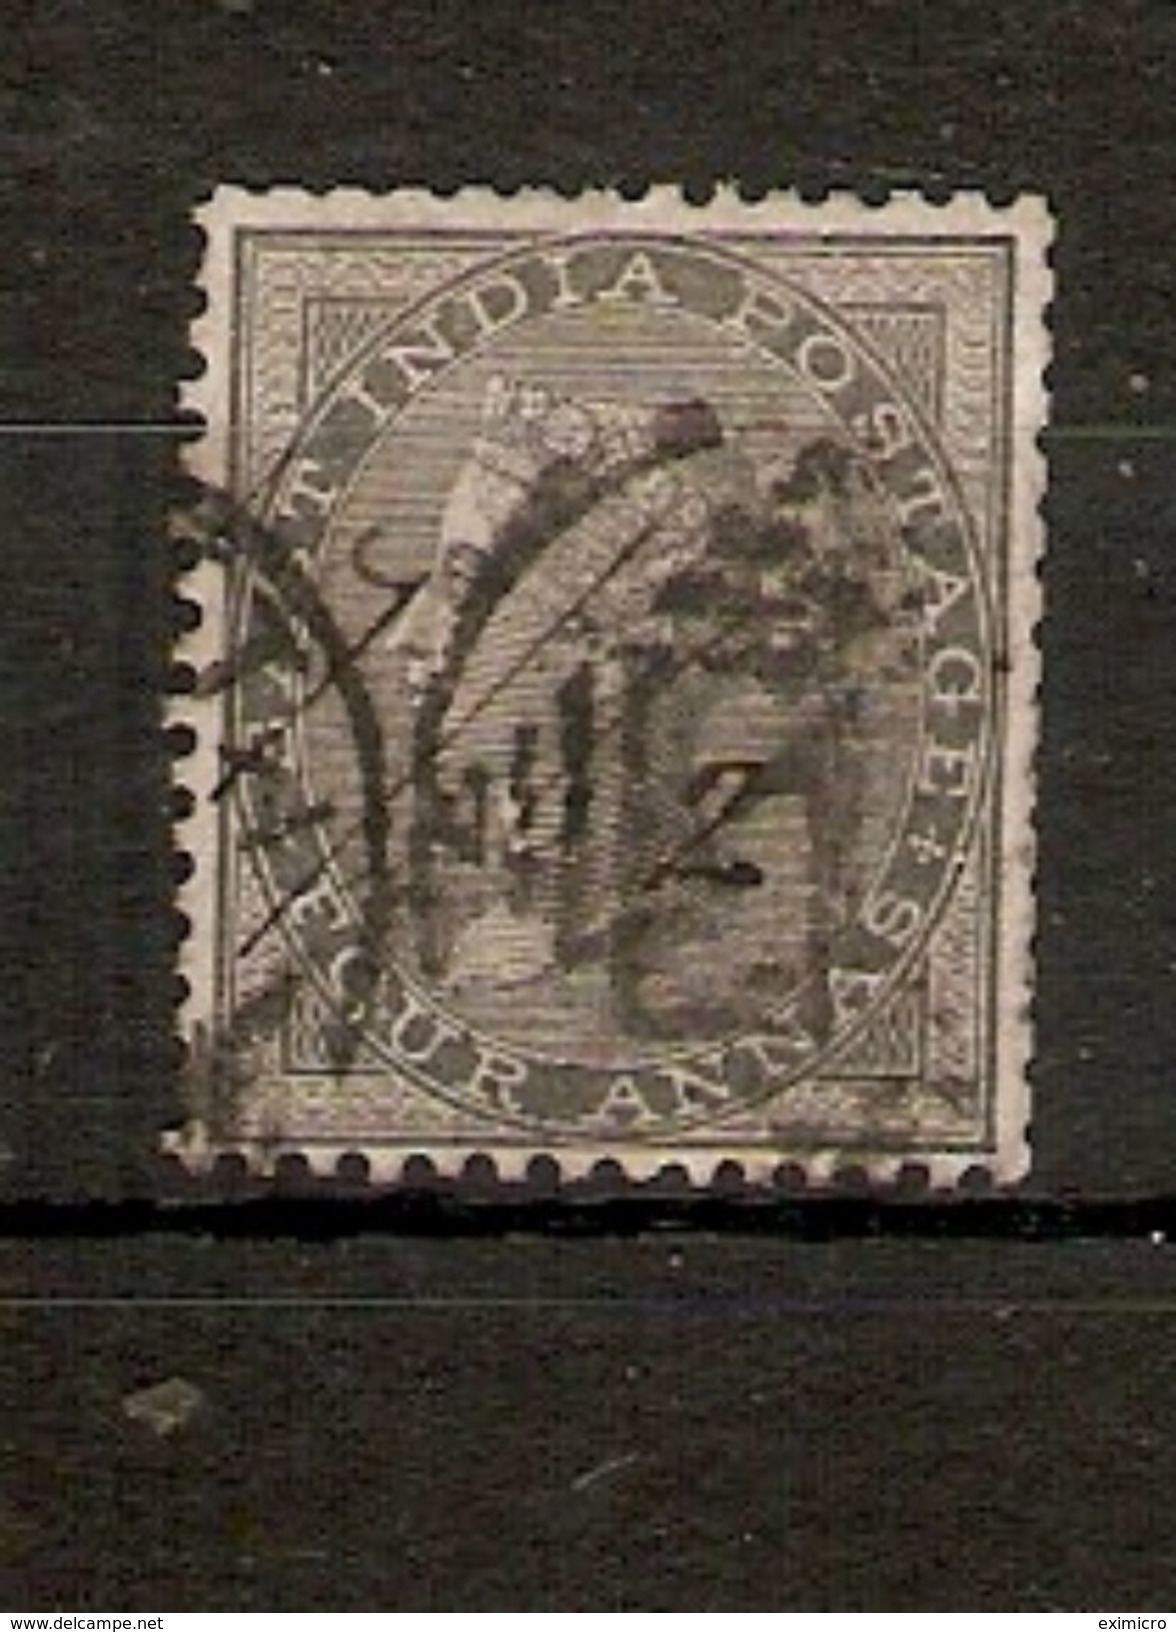 INDIA 1856 4a GREY - BLACK SG 46 NO WATERMARK FINE USED Cat £5.50 - 1854 East India Company Administration